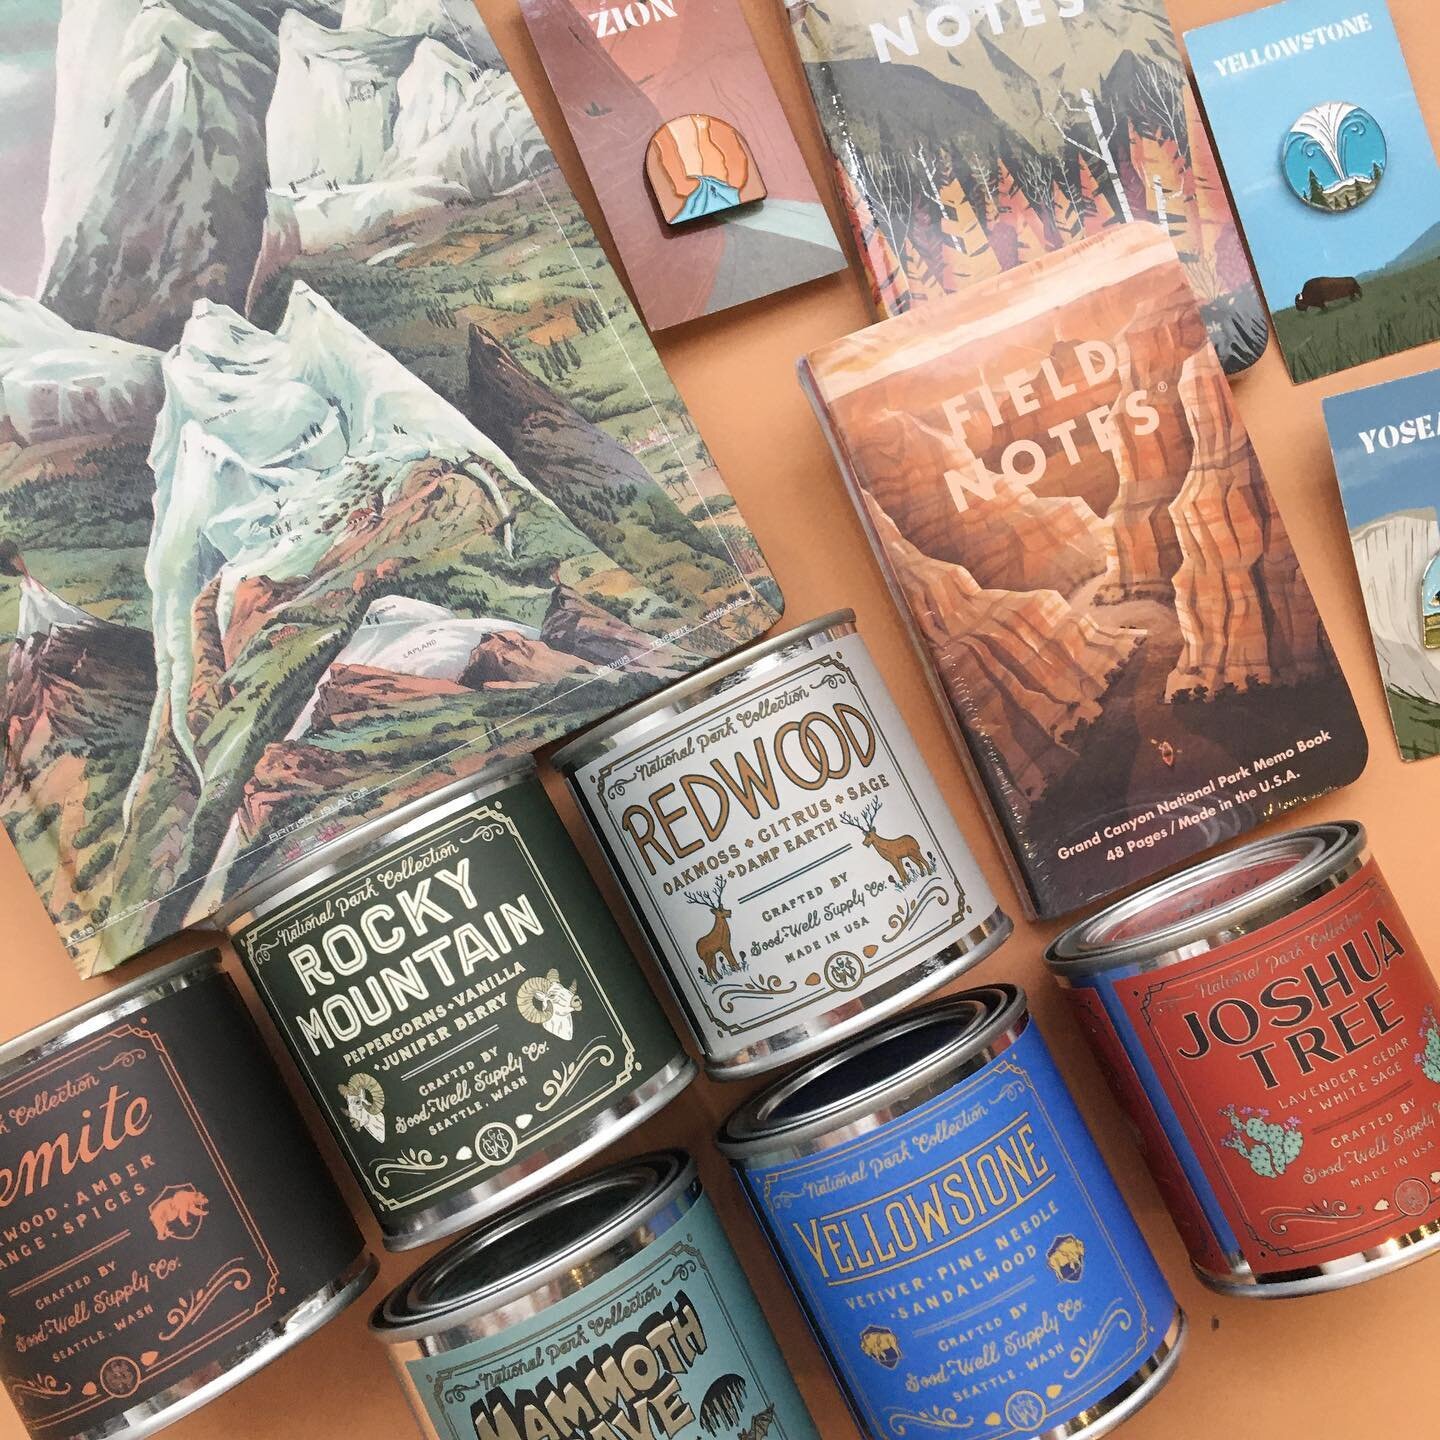 Our favorite National Park candles are back, along with lots of other park-themed goodies! 🏕 #nestdetroit #candles #notebooks #enamelpins